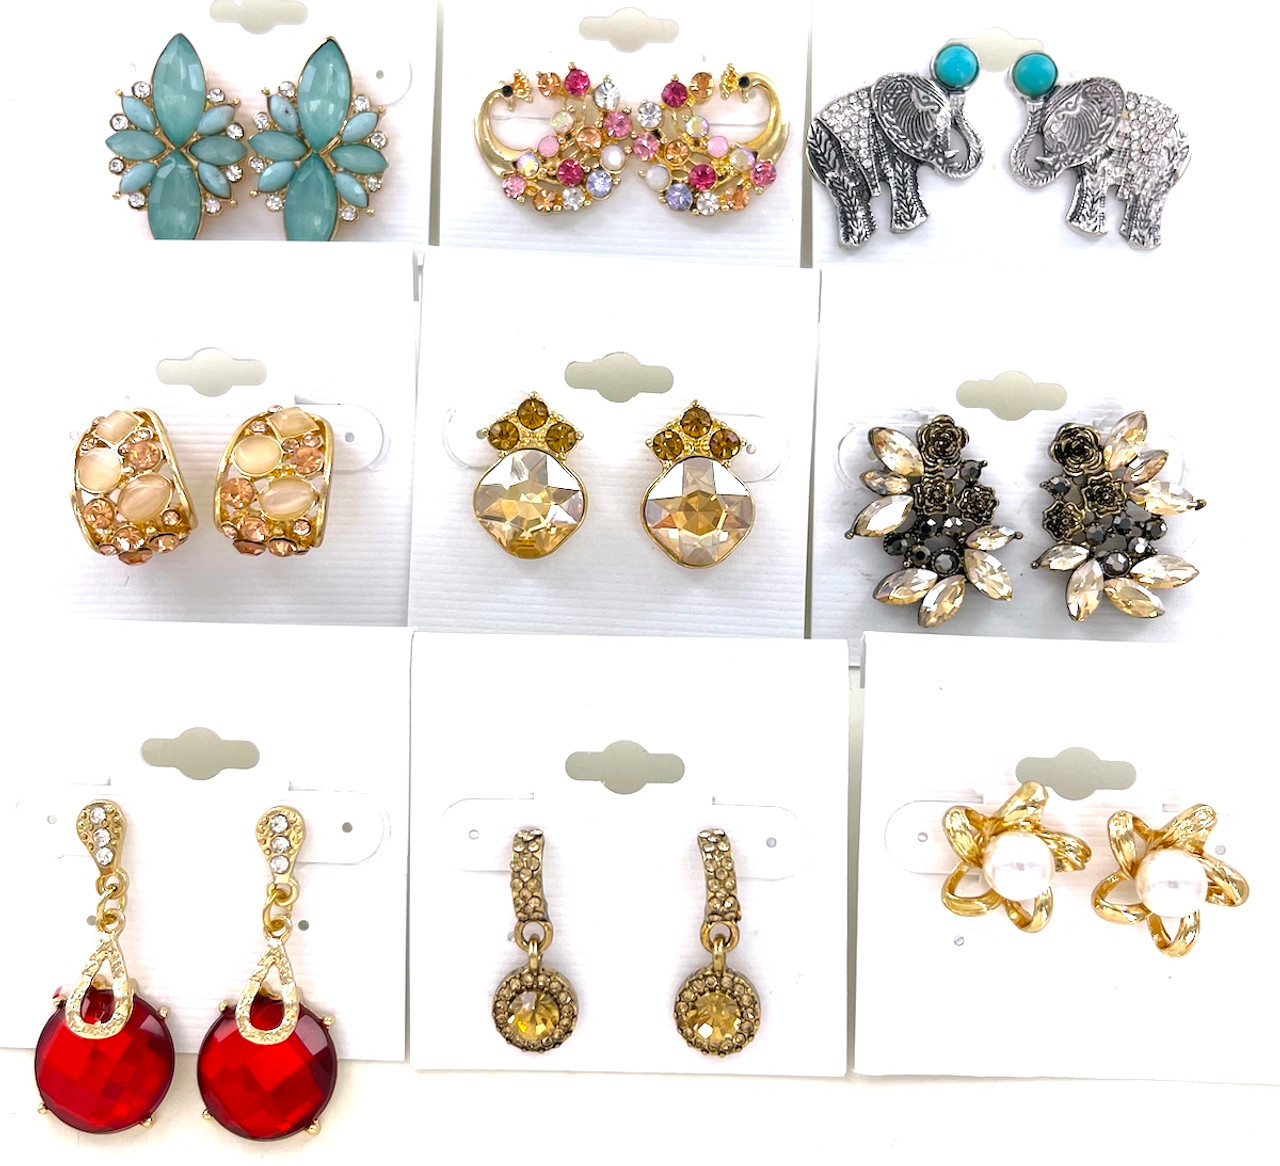 Where can I buy fashion jewelry wholesale? - Quora